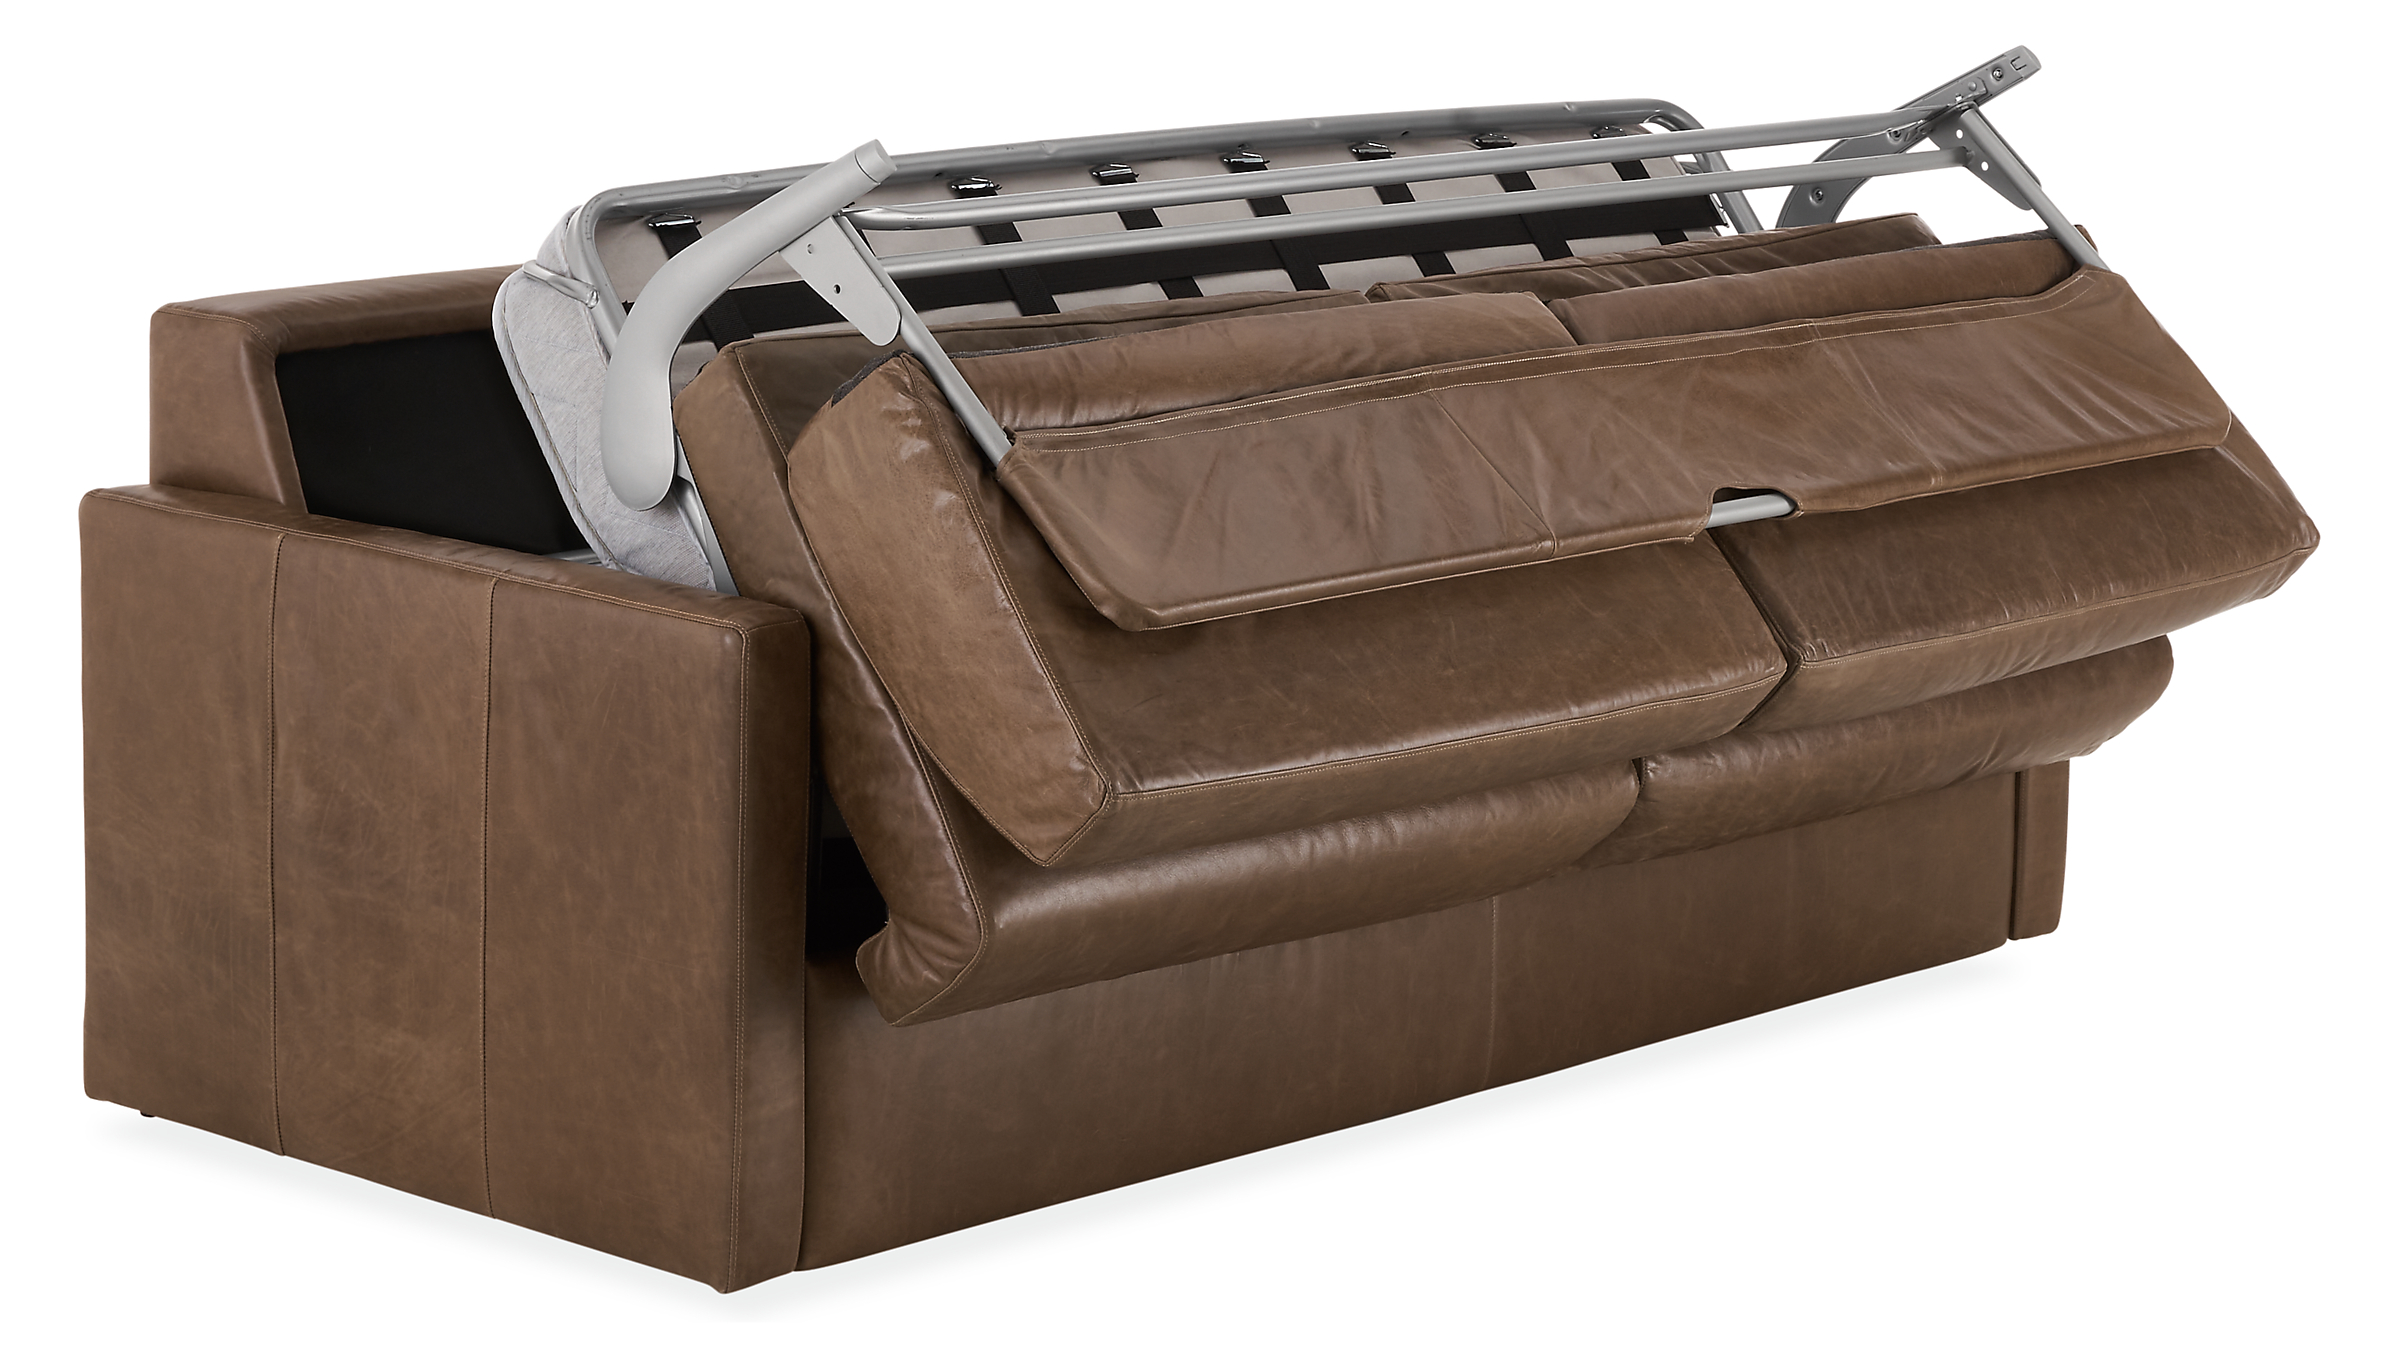 Detail of Franklin foldout sleeper sofa in partially open position in Vento Pewter leather.